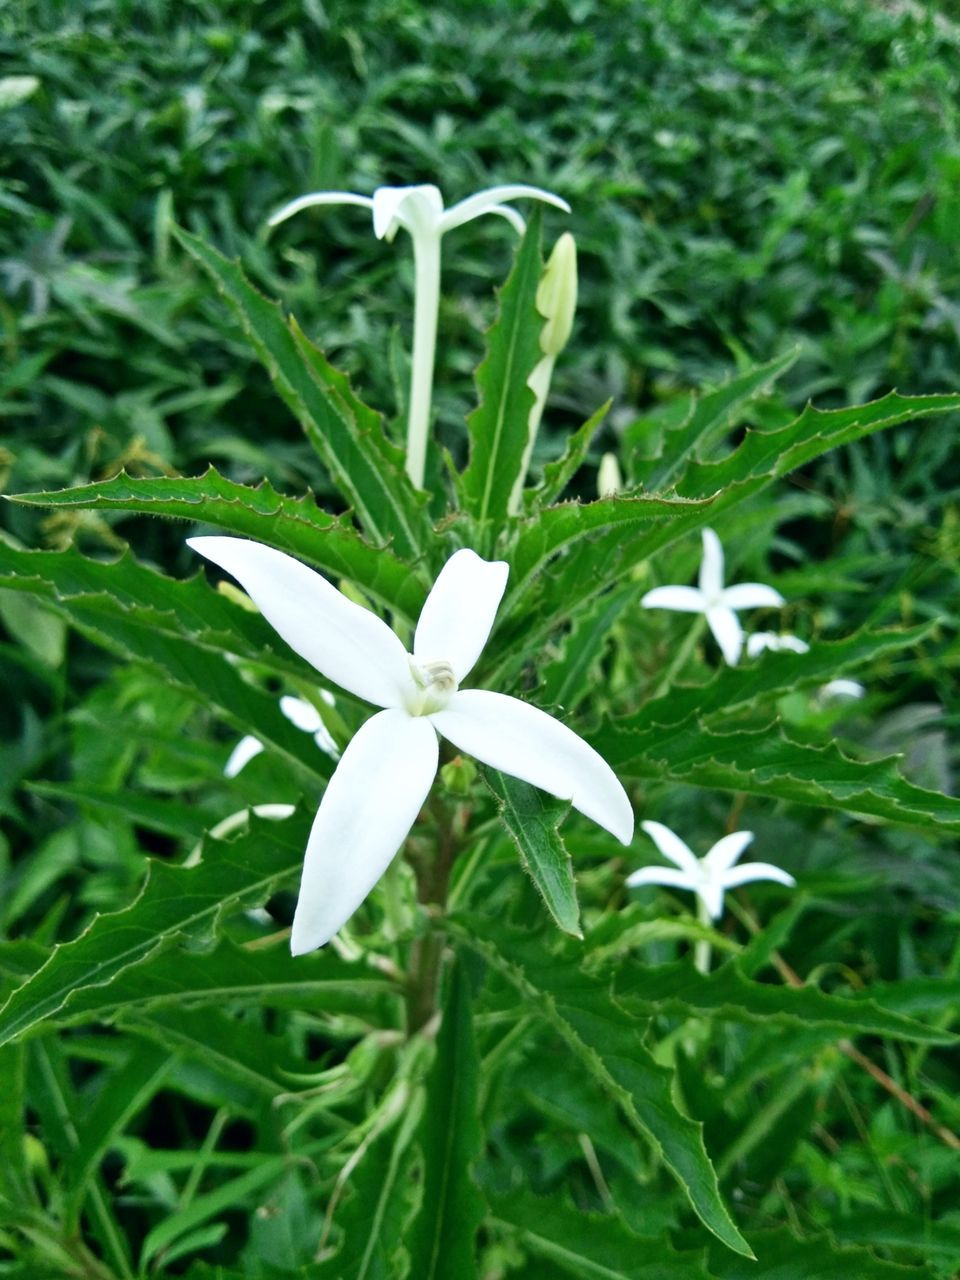 CLOSE-UP OF WHITE FLOWERING PLANTS ON LAND